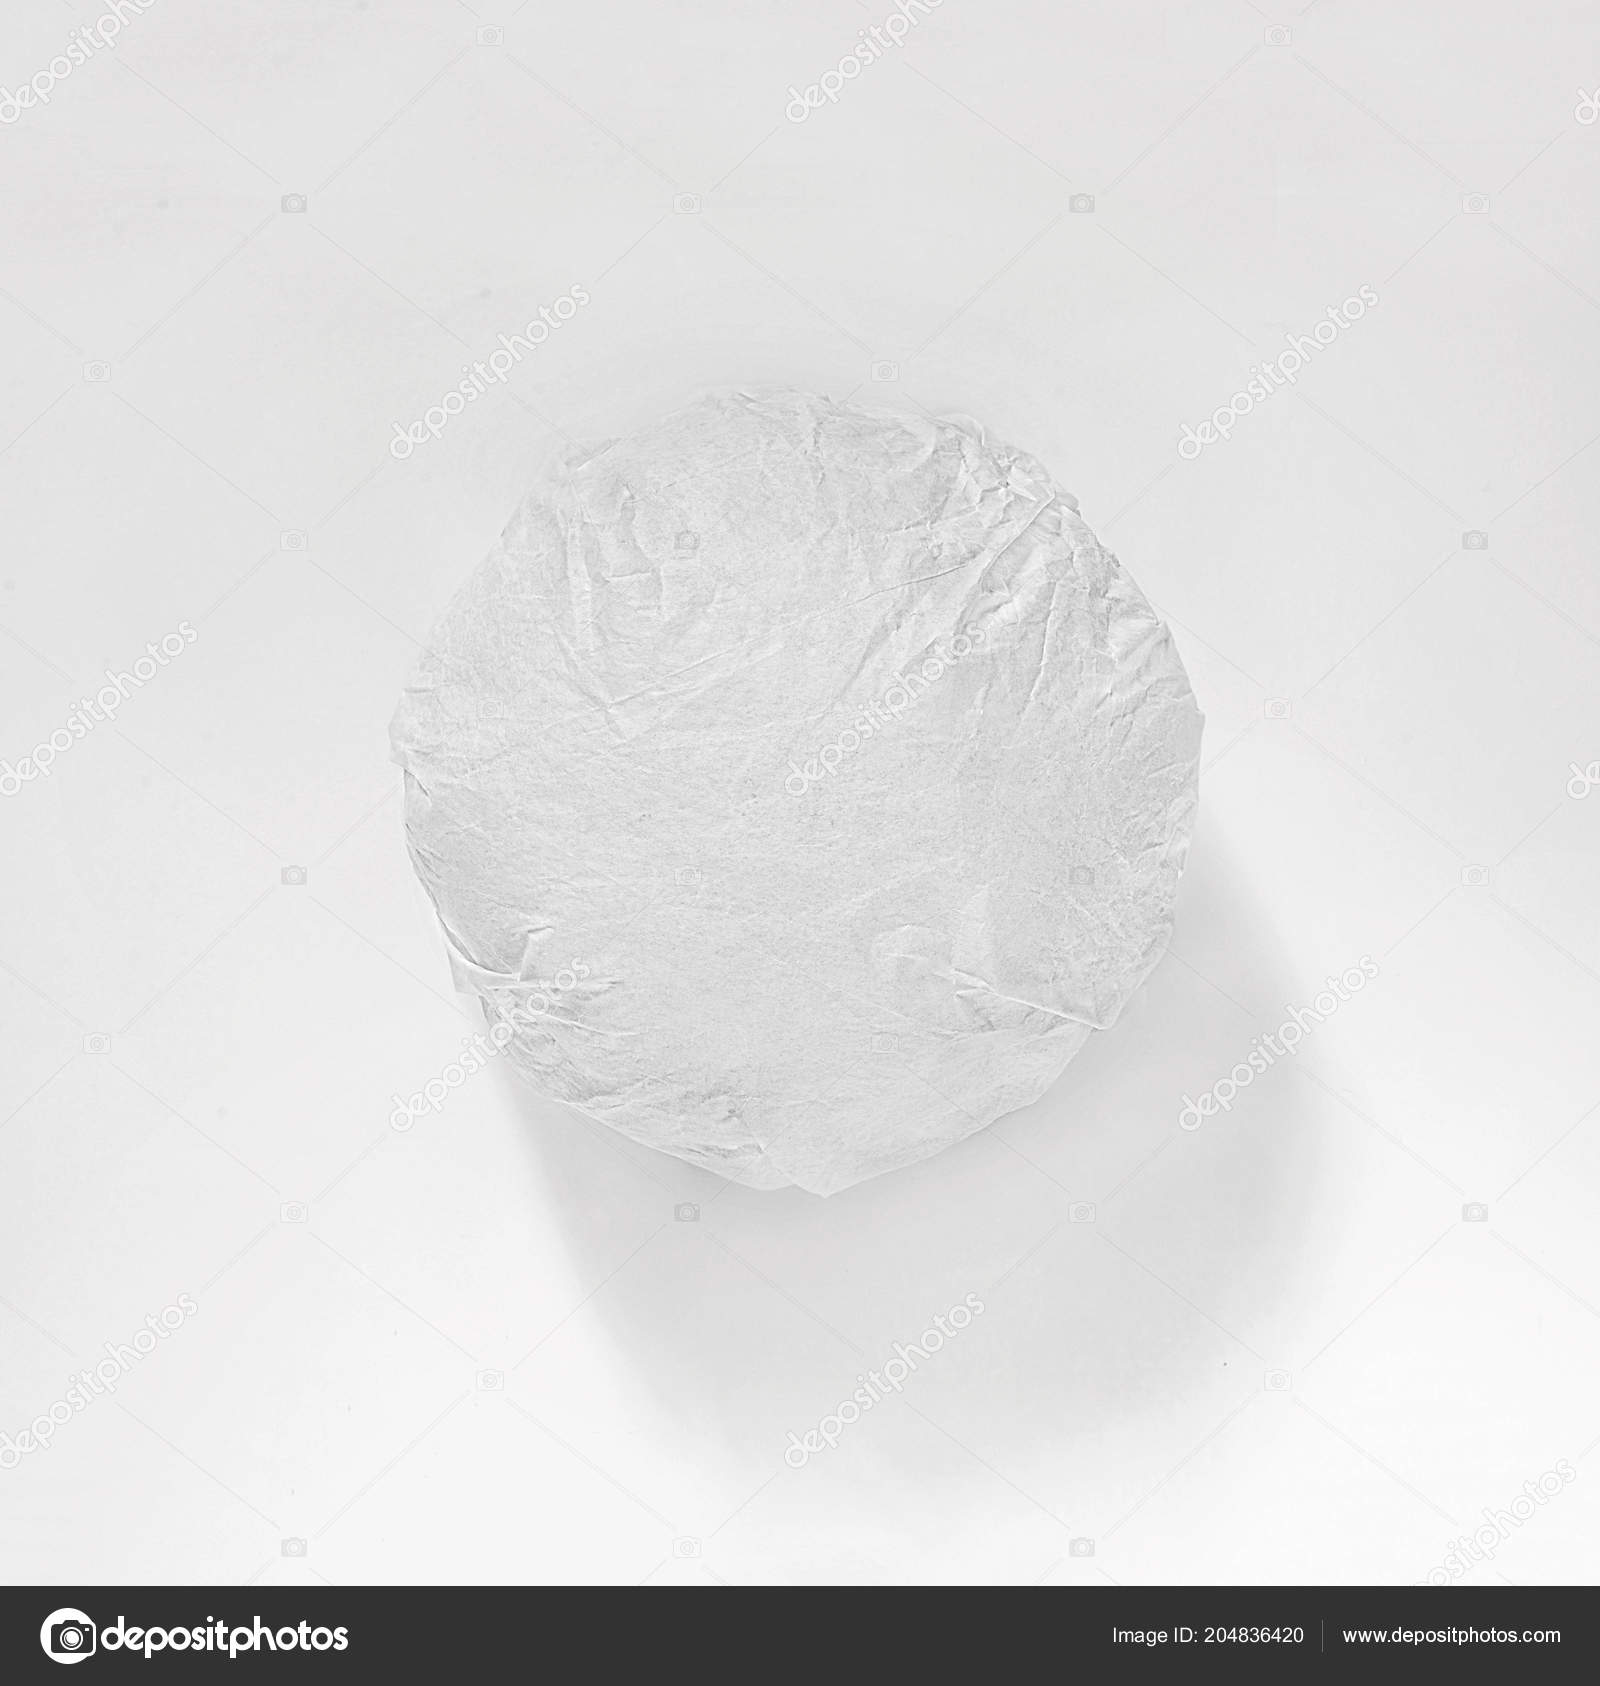 Download Classic Burger Packed Wrapping Paper White Background Top View Stock Photo Image By C R Studio 204836420